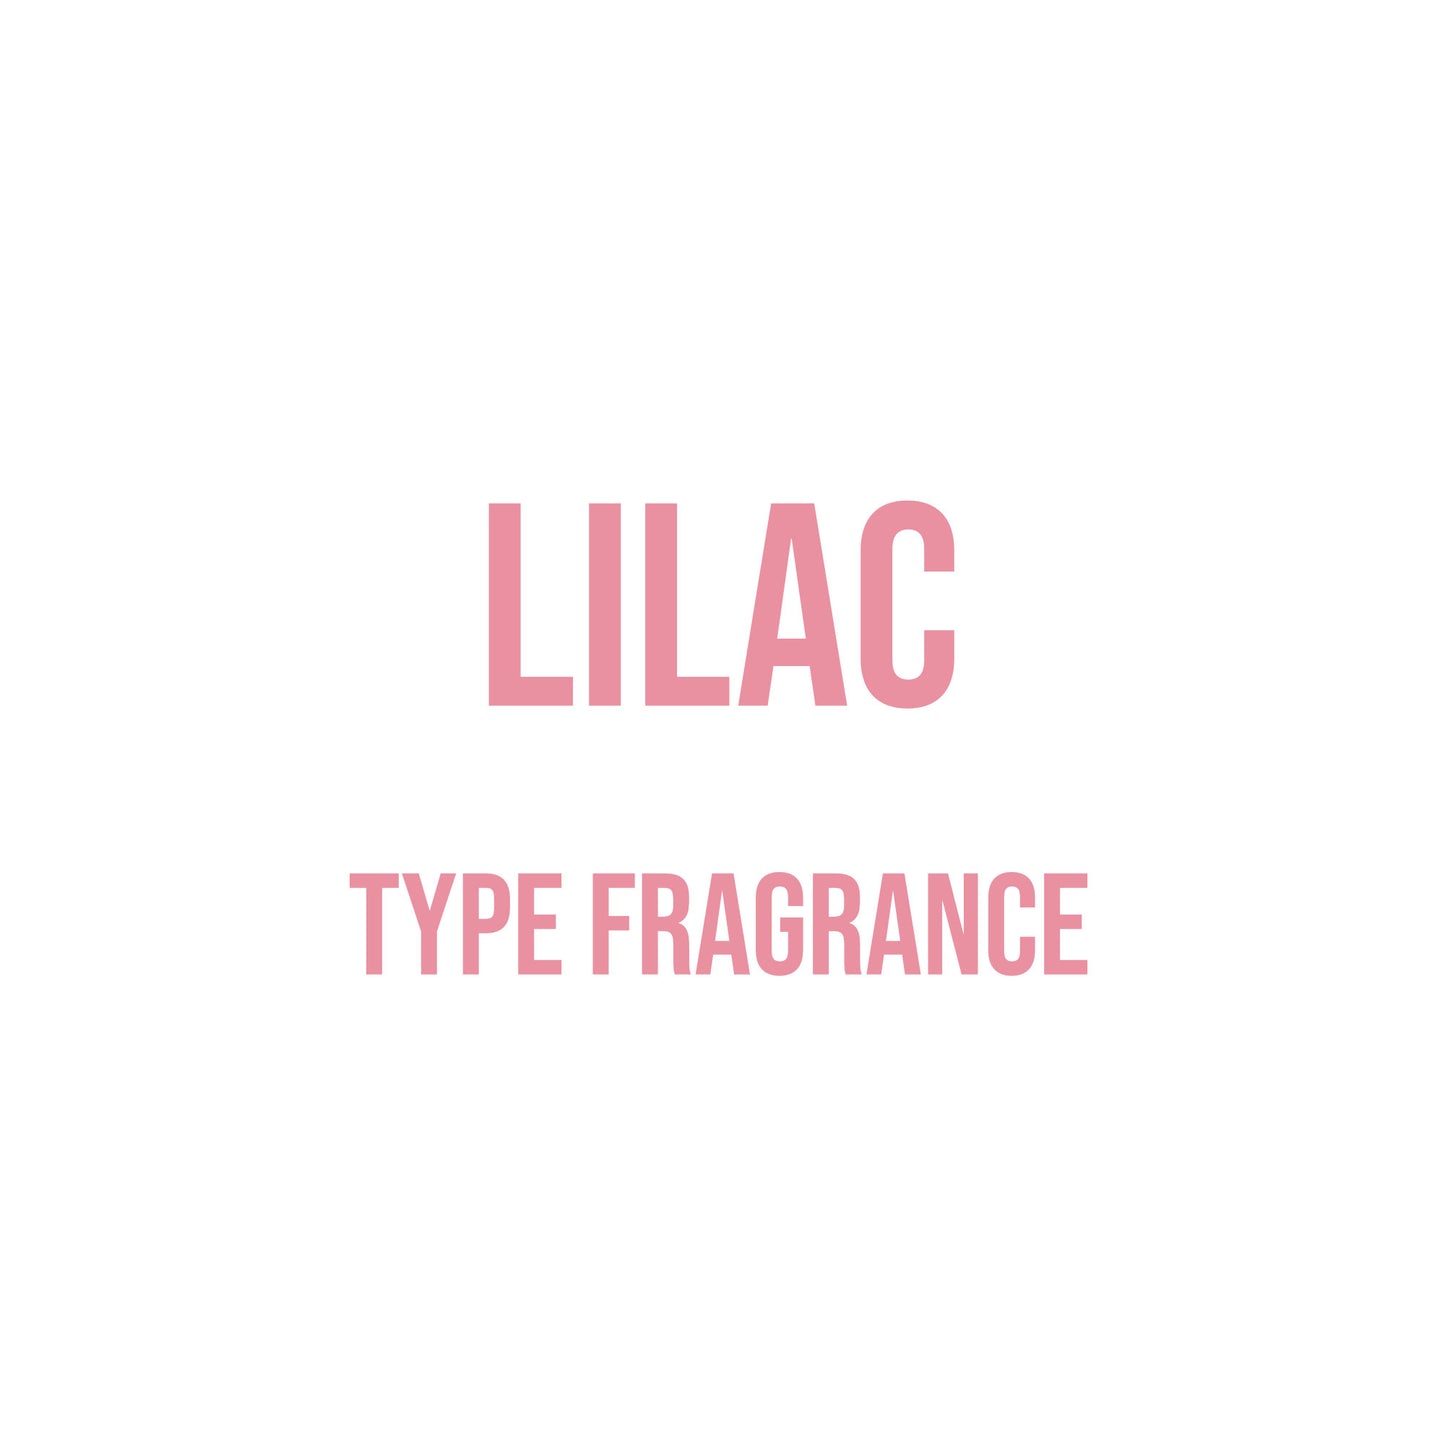 Lilac Type Fragrance